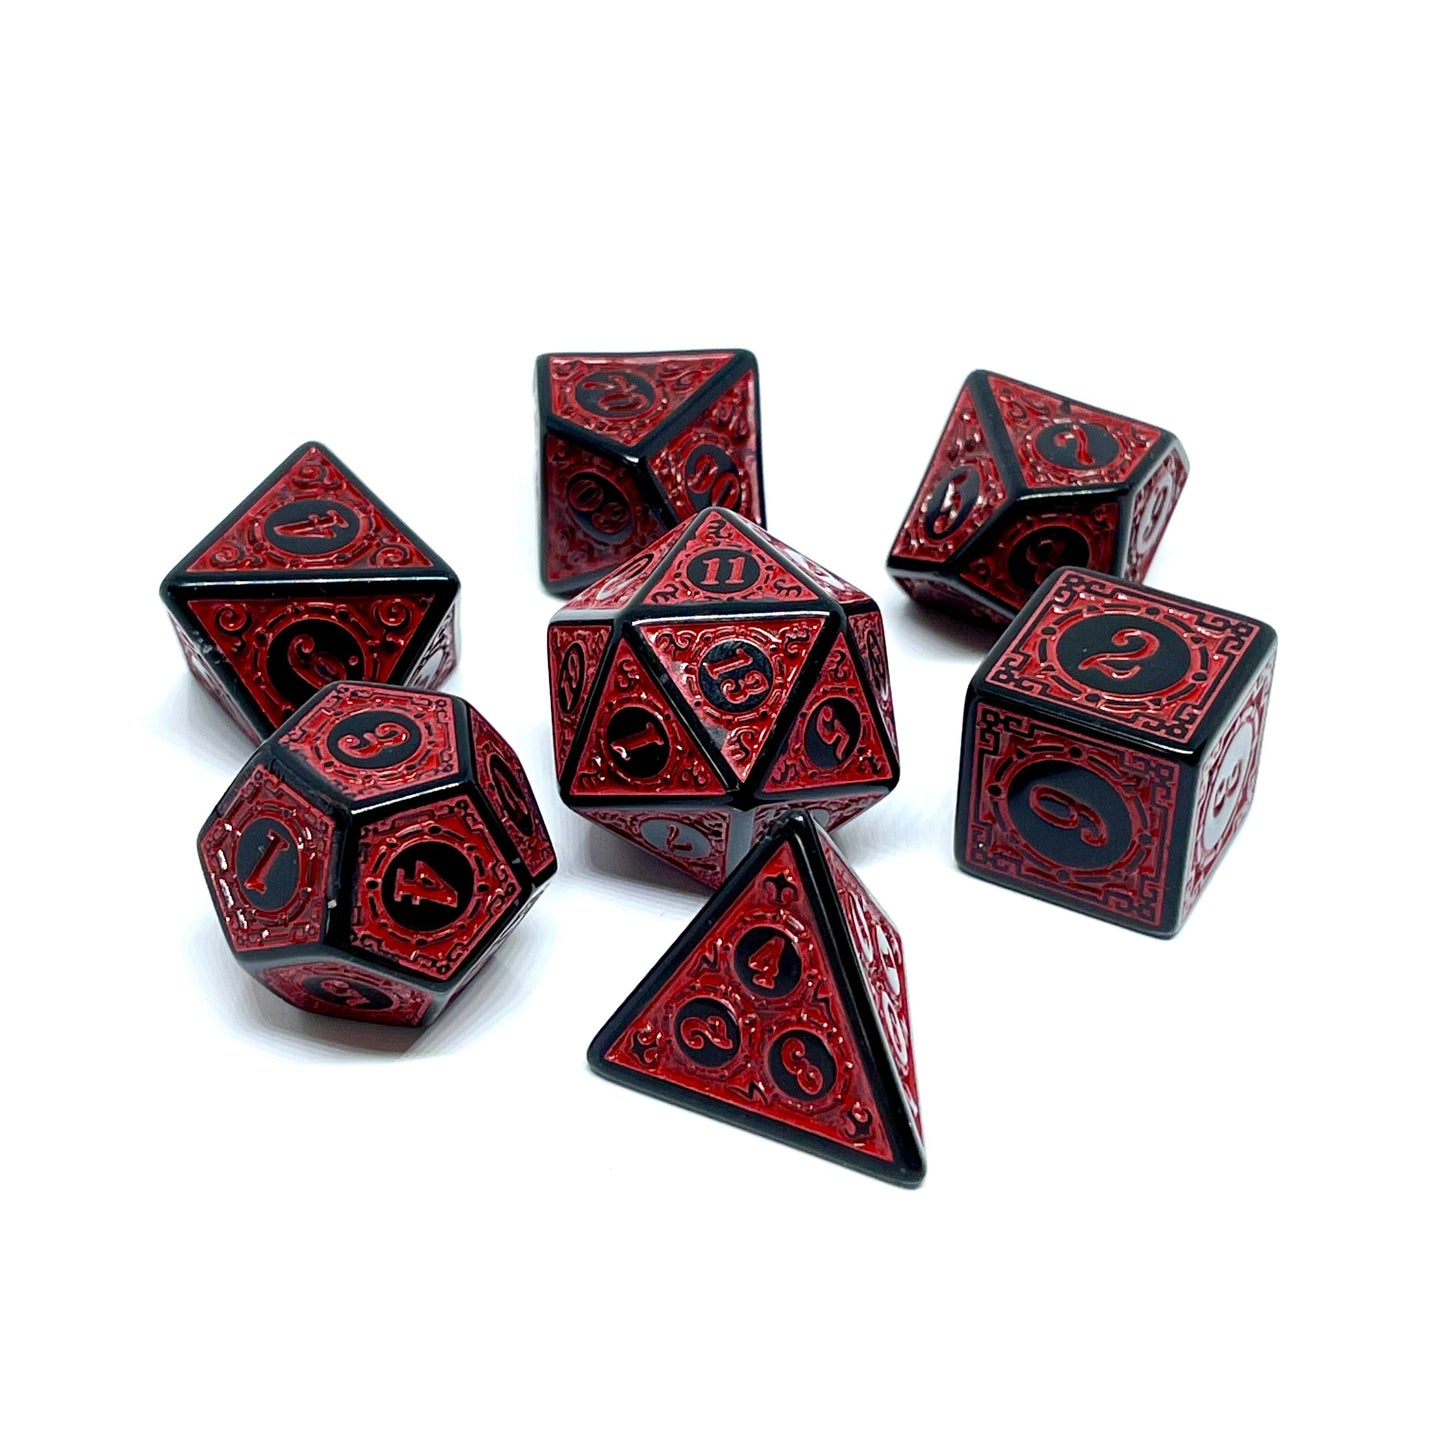 Red Dragon plastic dnd dice set of 7 red and black